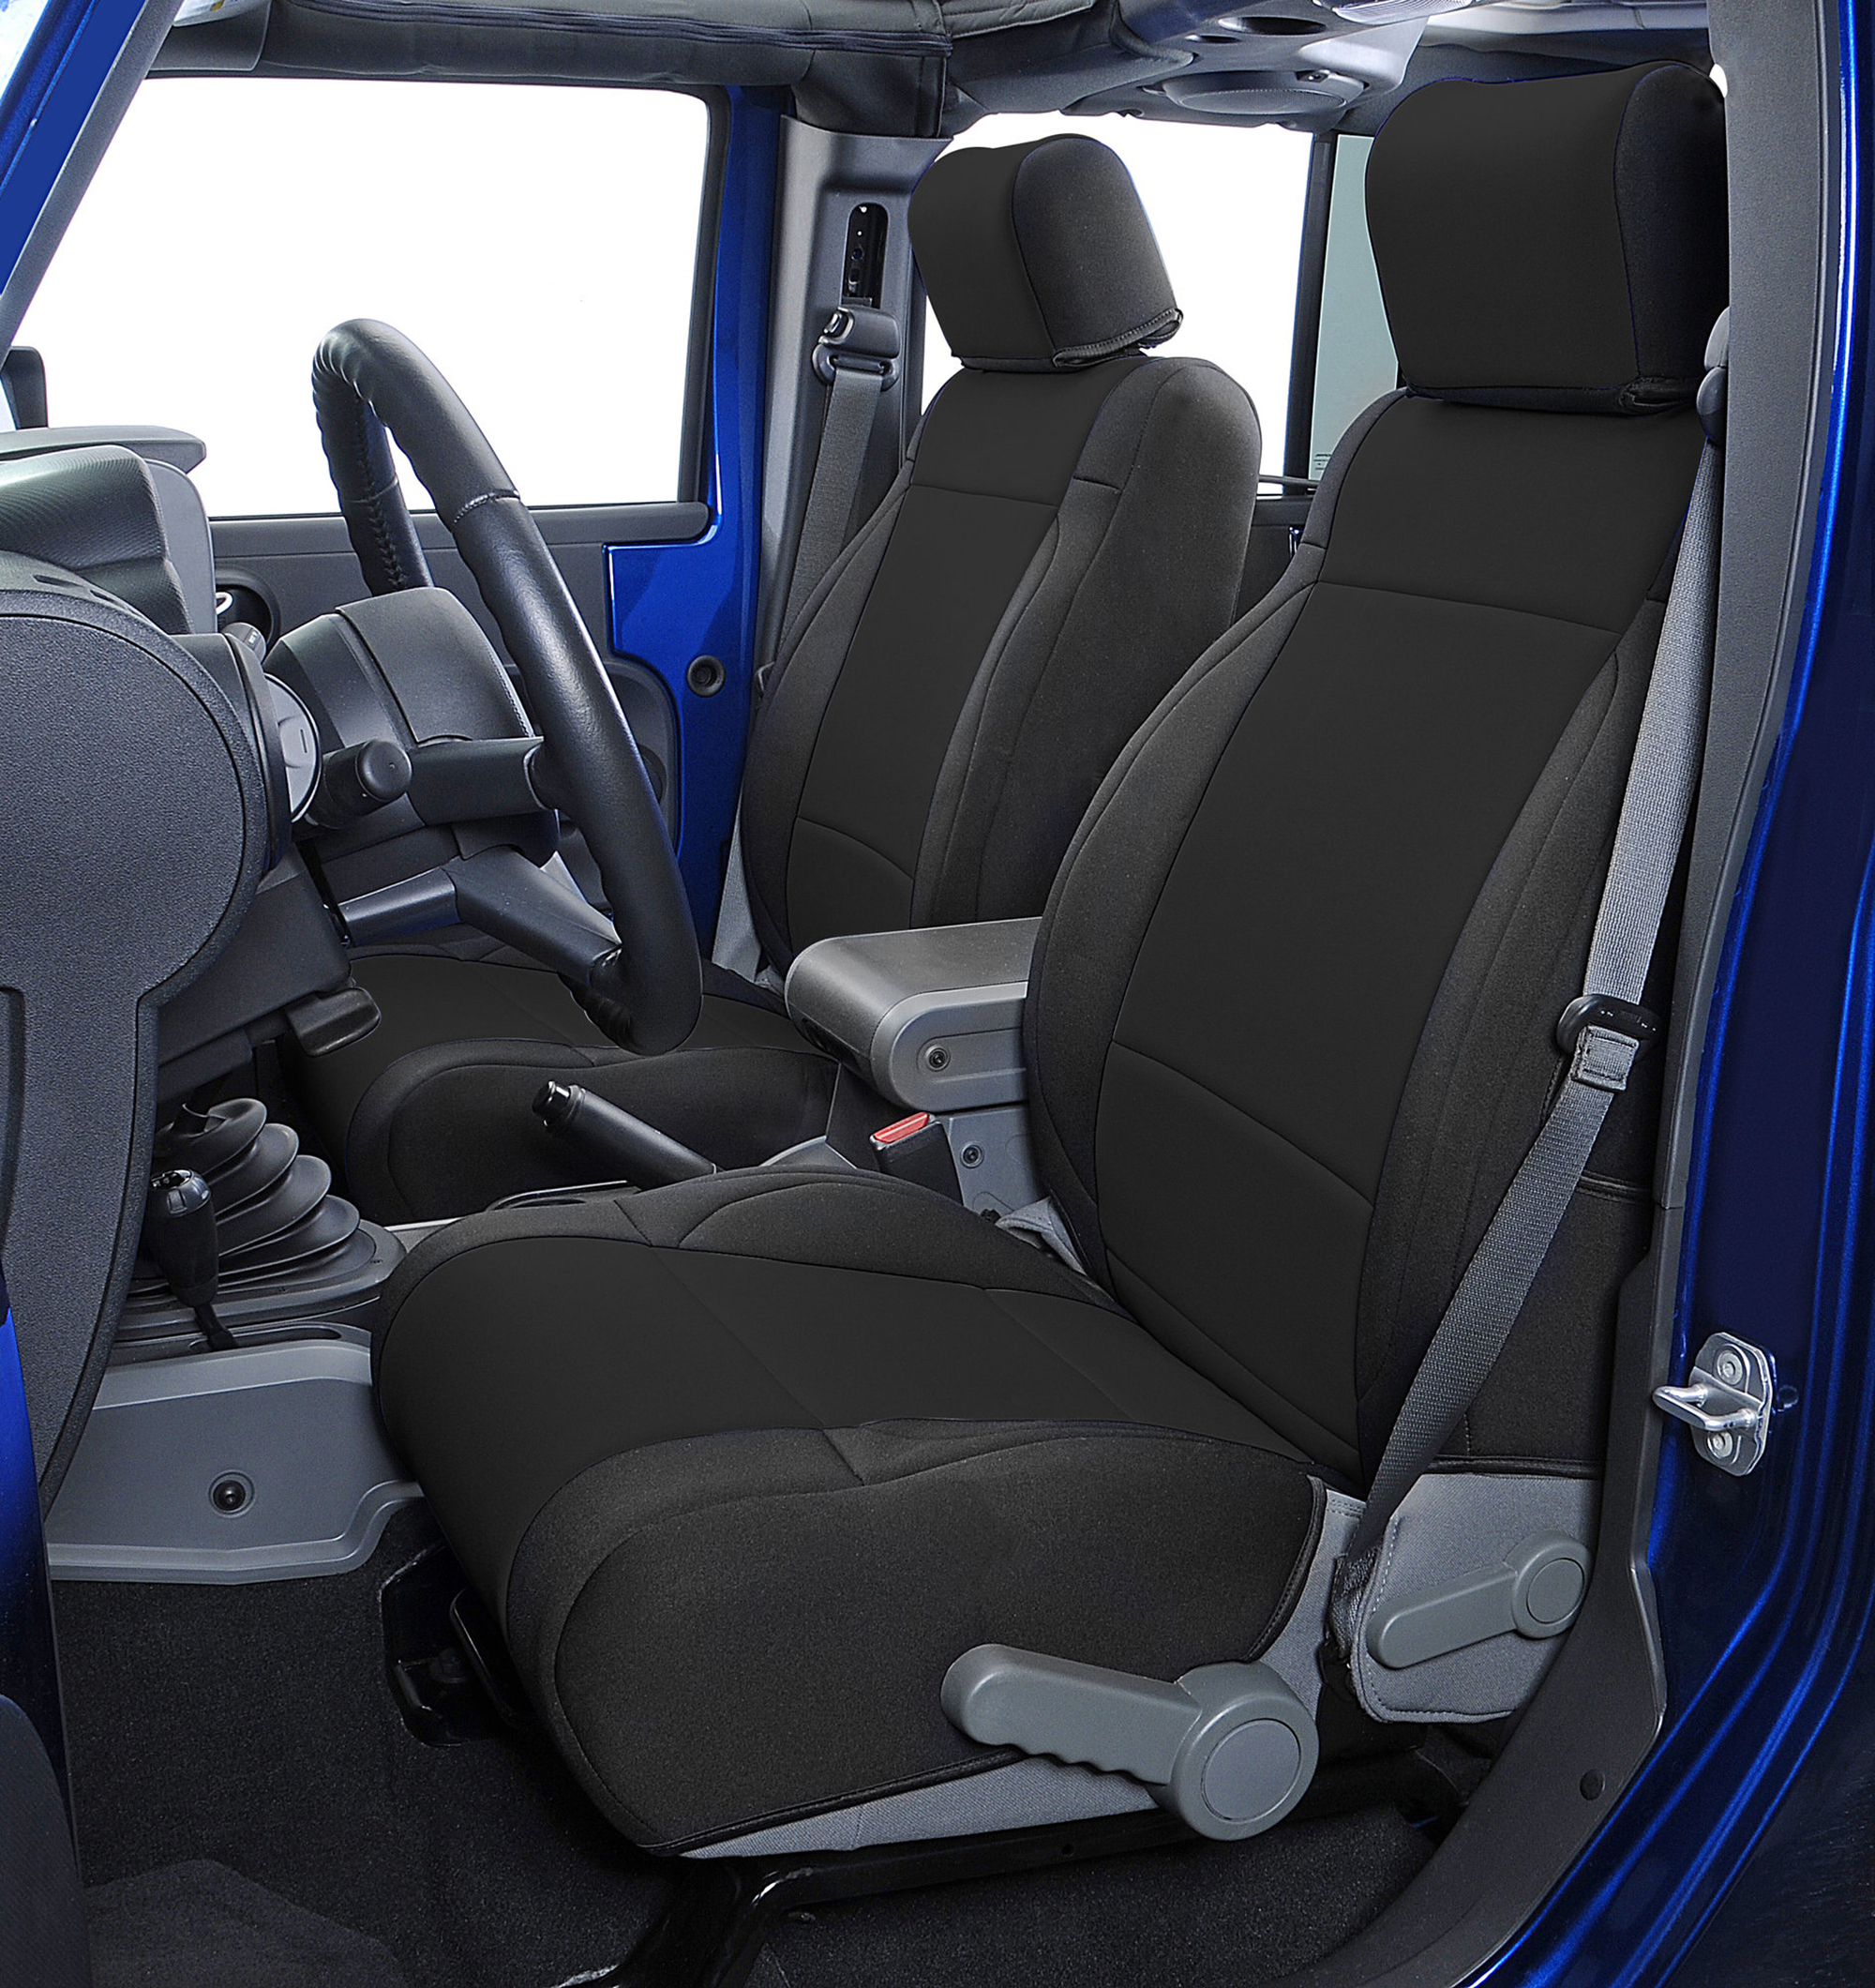 Top-Rated Seat Covers for Jeep Wranglers - Car and Driver